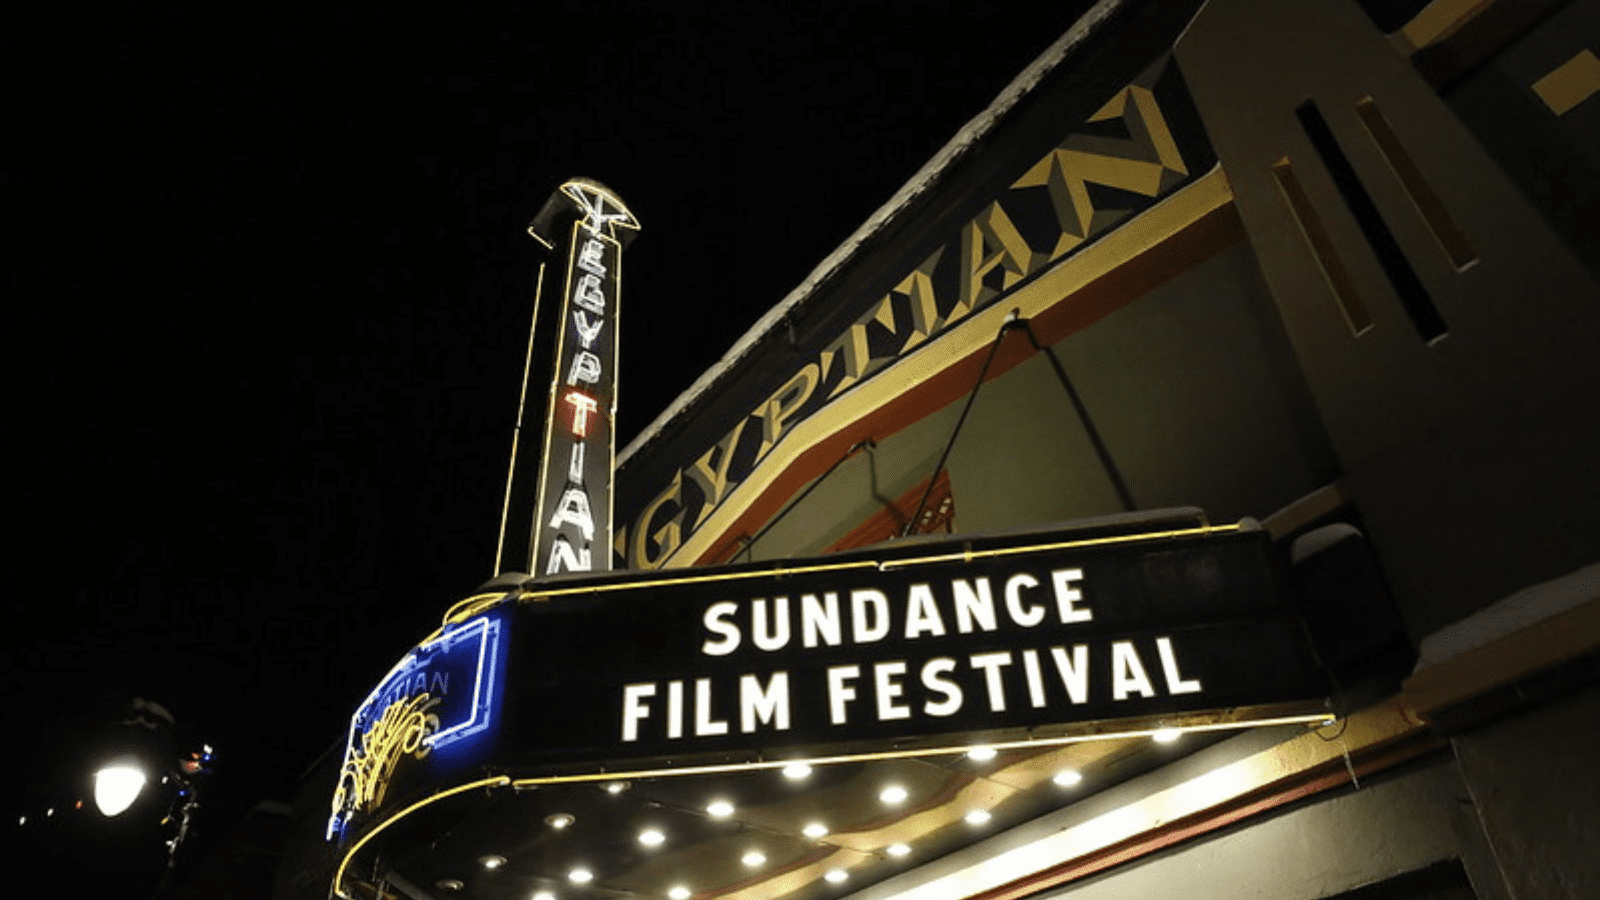 A image looking up at the 2020 Egyptian Theatre at night in the dark, which has a sign on it, which reads Sundance Film Festival in bright letters